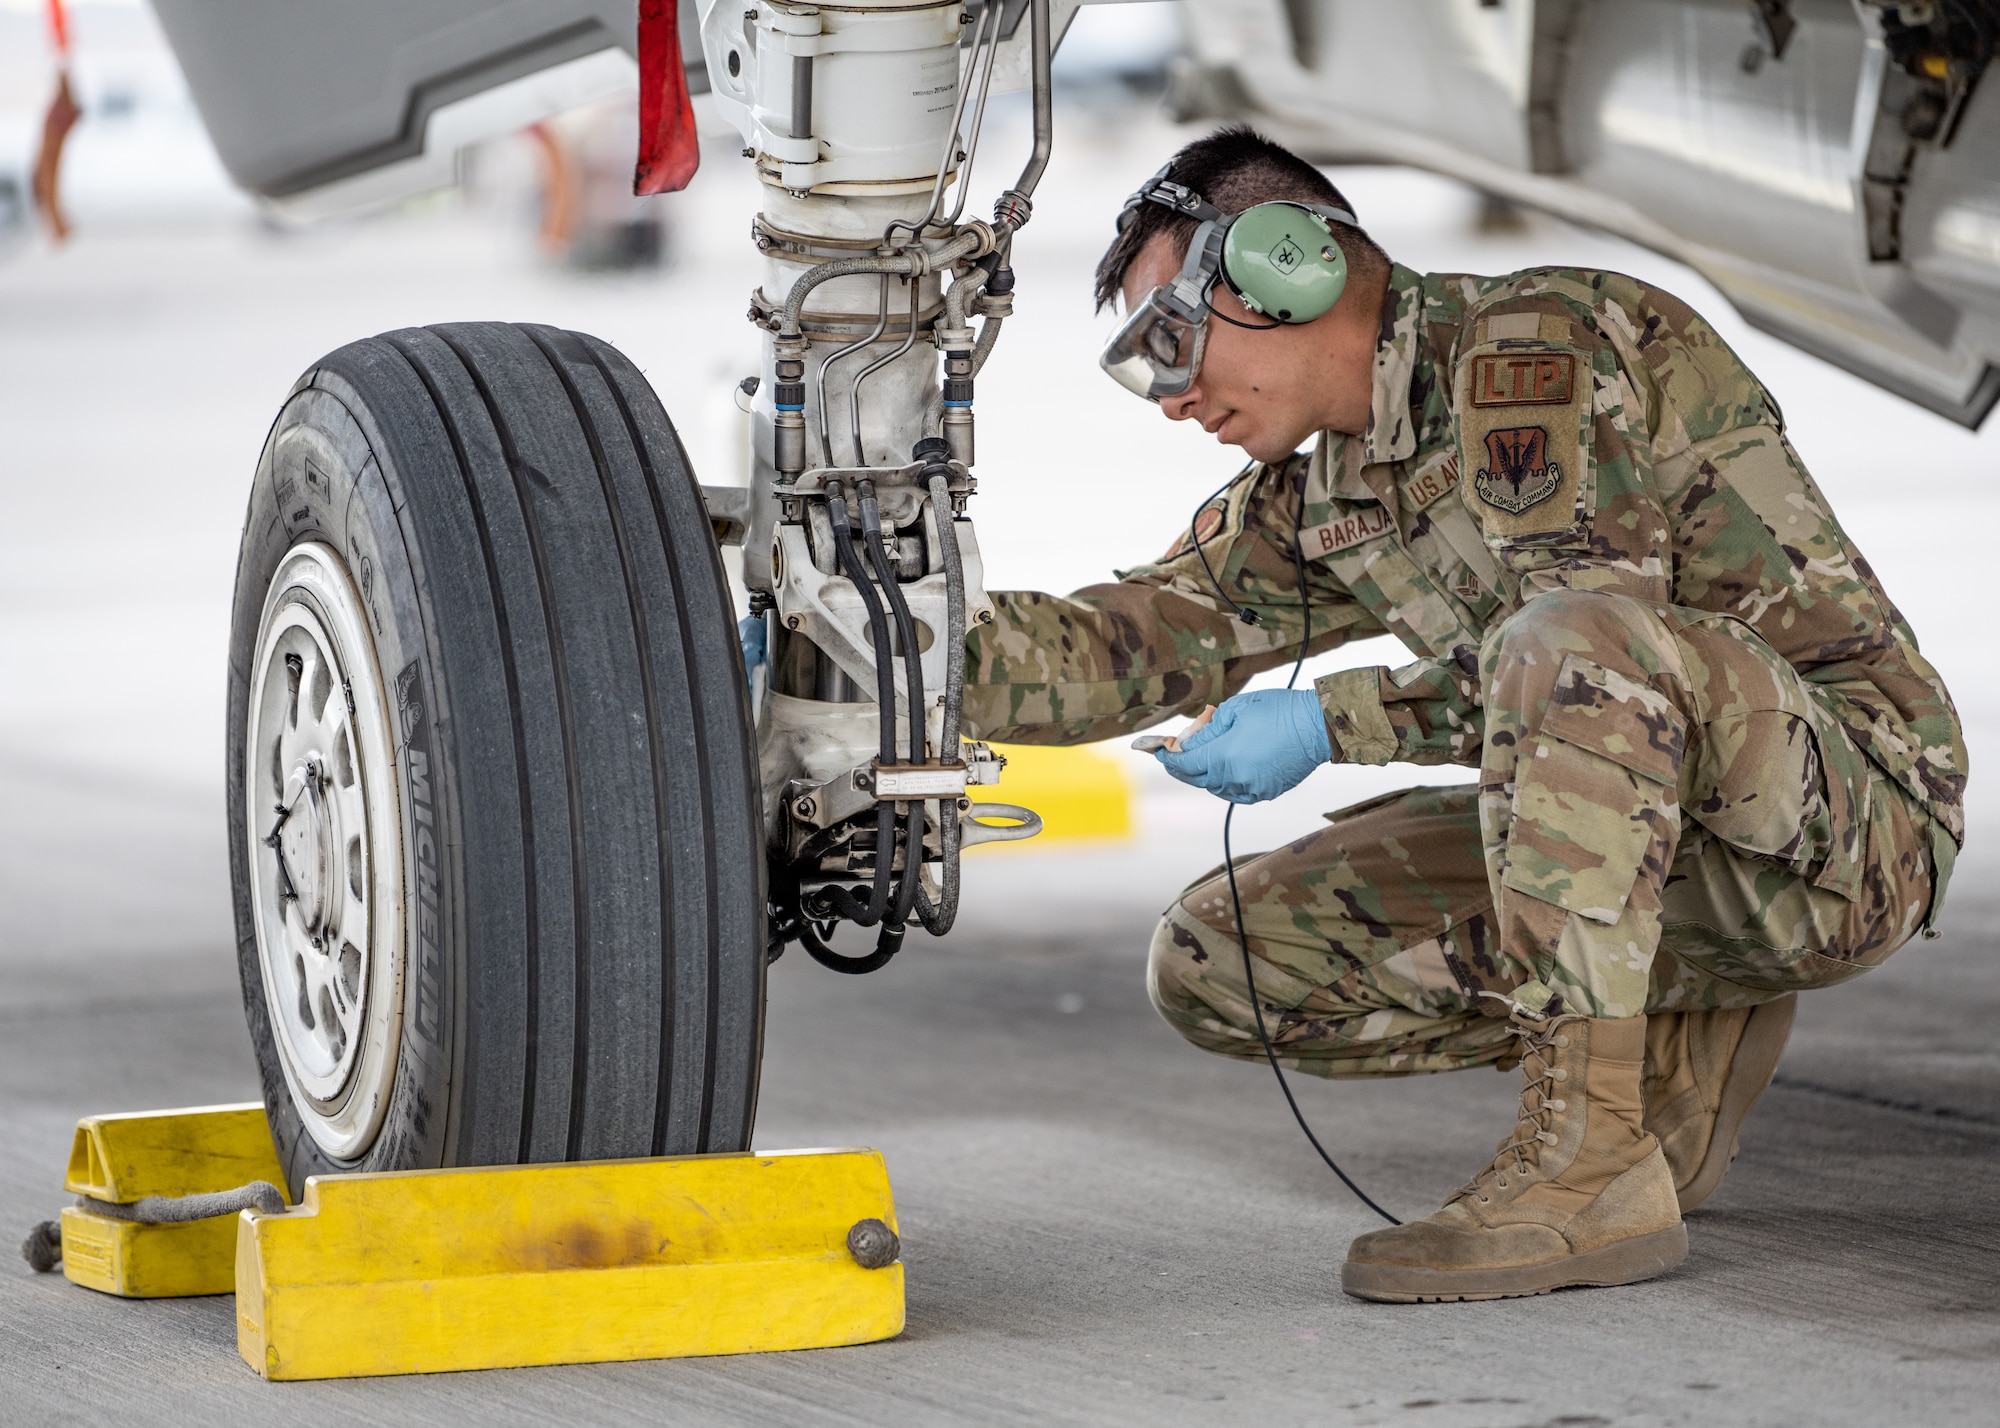 A photo of F-35 maintainers working on a jet